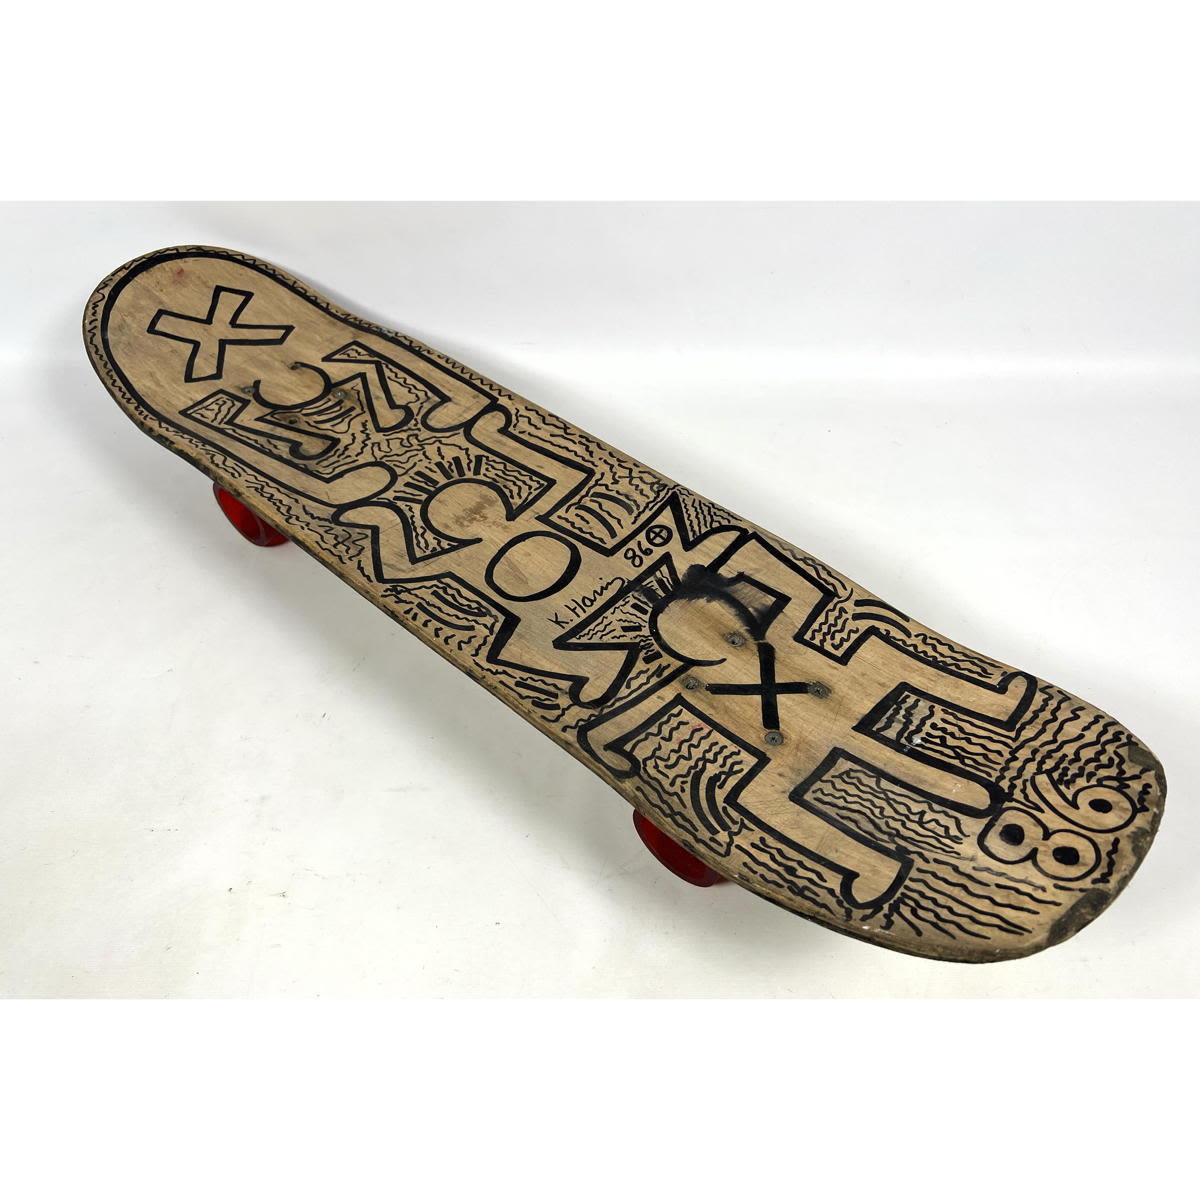 Vintage Skateboard painted in the 3001c3